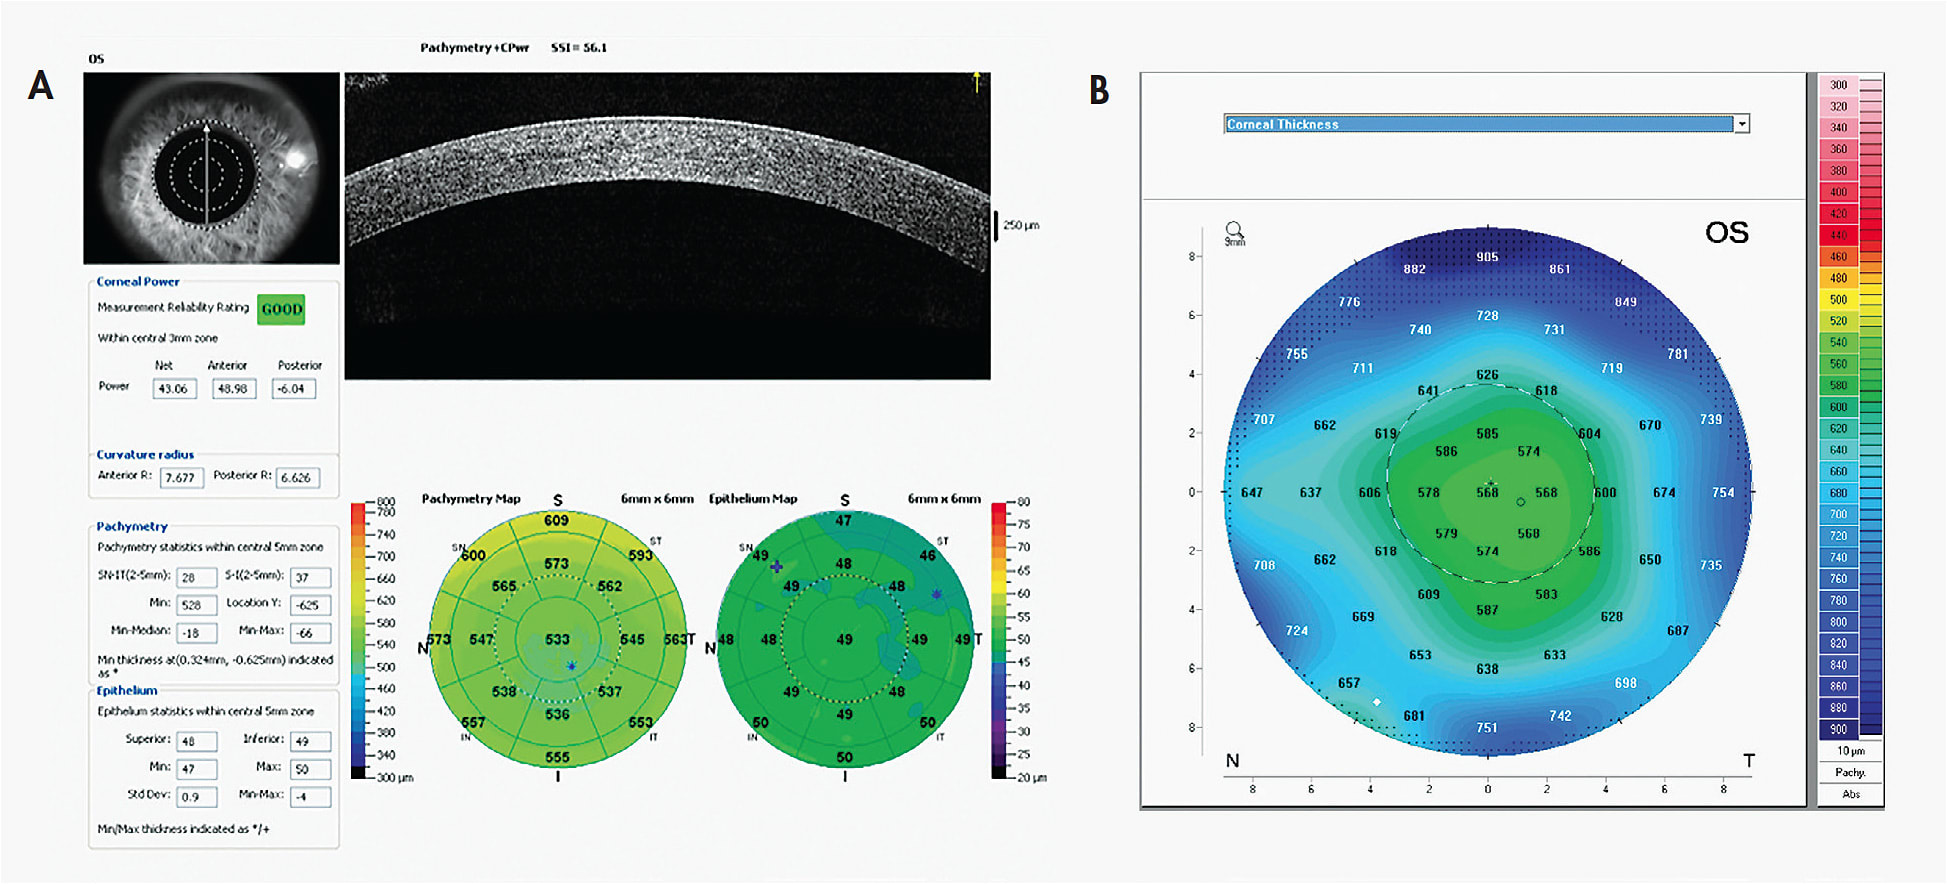 Figure 4. Optical pachymetry. (A) OCT-based optical pachymetry, showing overall corneal thickness (left map) and epithelial thickness (right map). (B) Scheimpflug camera-based optical pachymetry.